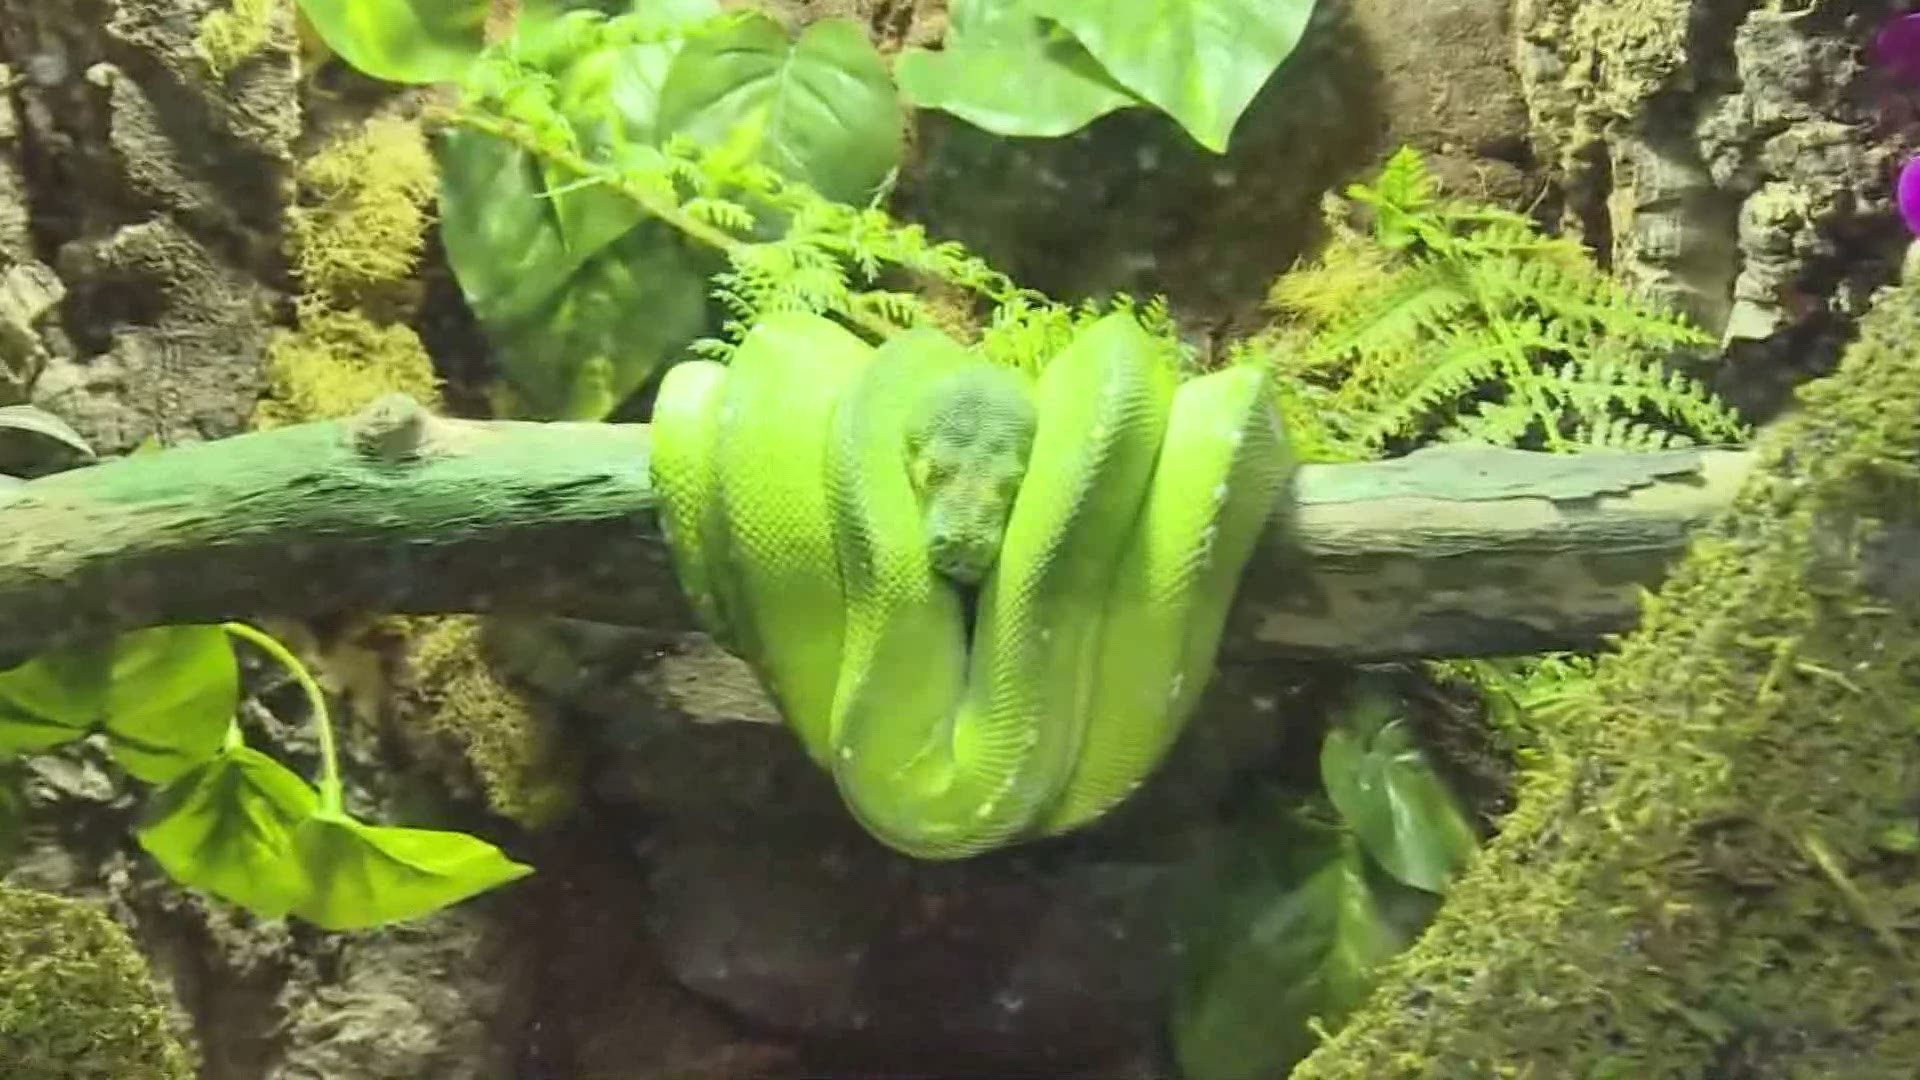 March 19, 2019: We explore the upgrades made to the Asia & Indonesia gallery at the Greater Cleveland Aquarium. Among the new species on display are a frilled lizard and green tree python.